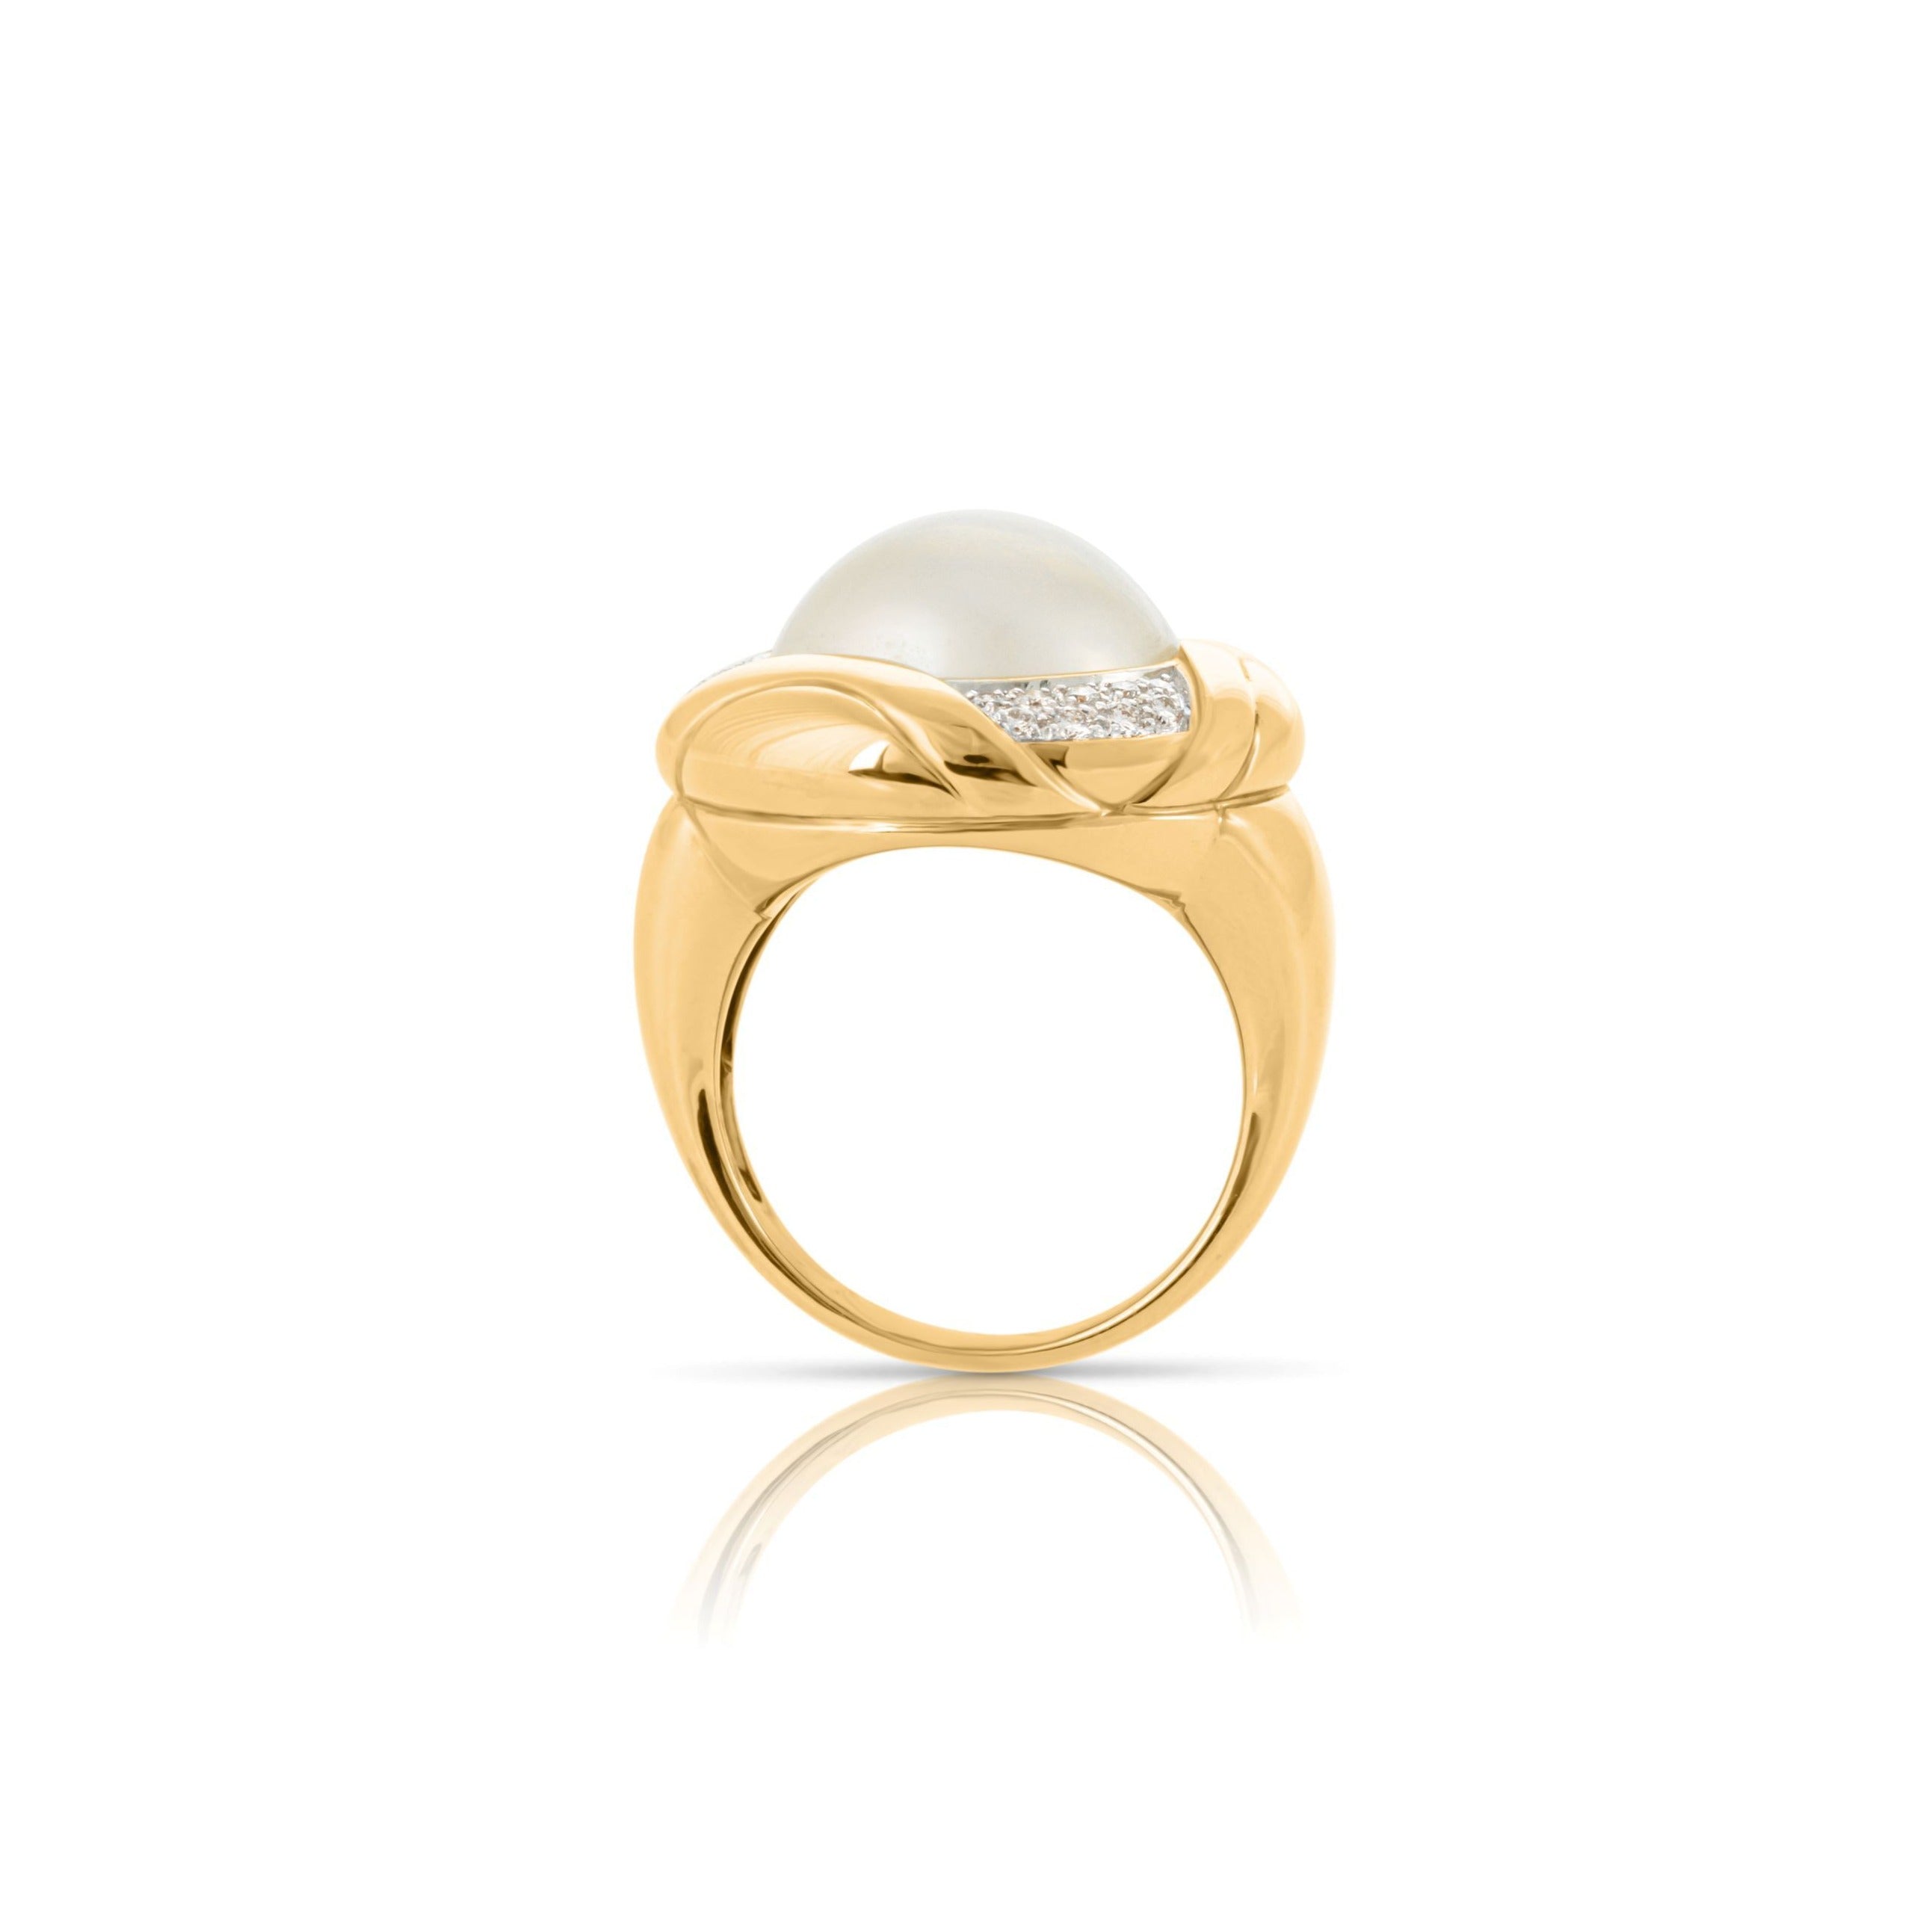 Vintage pearl ring in 18ct gold and diamond accents.